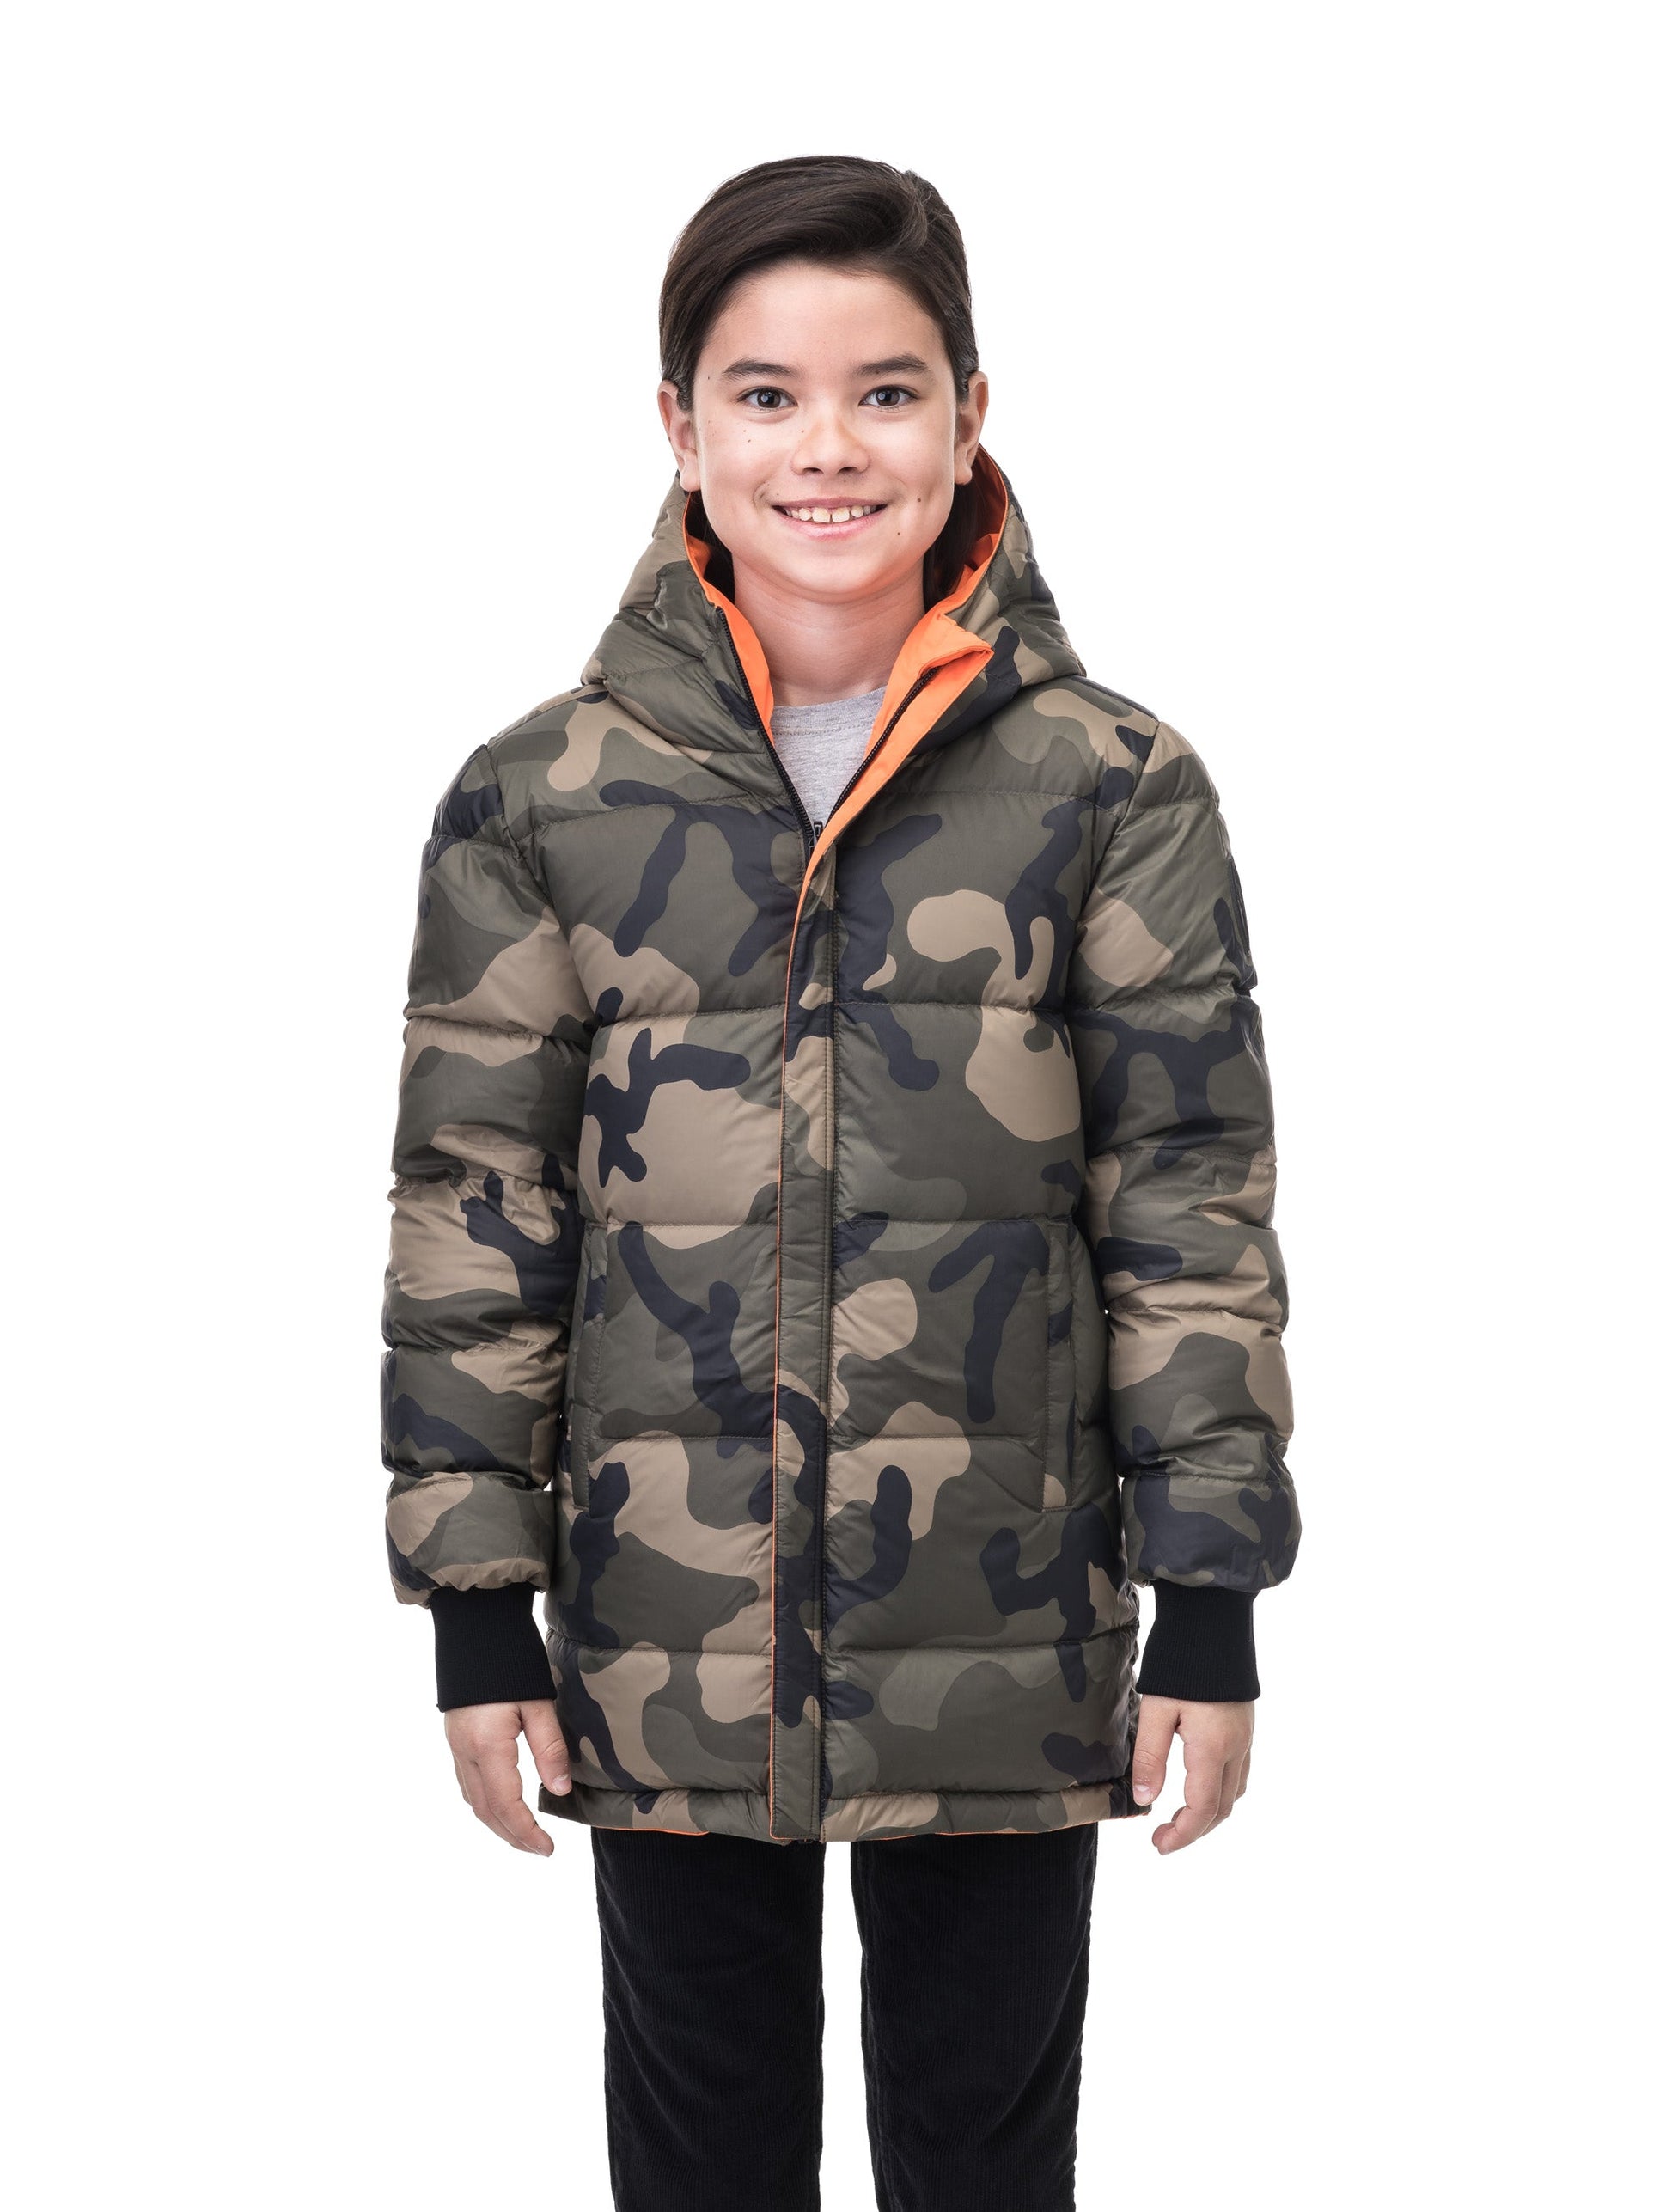 Kids' reversible knee length, down filled parka with waterproof finish in Atomic/Camo